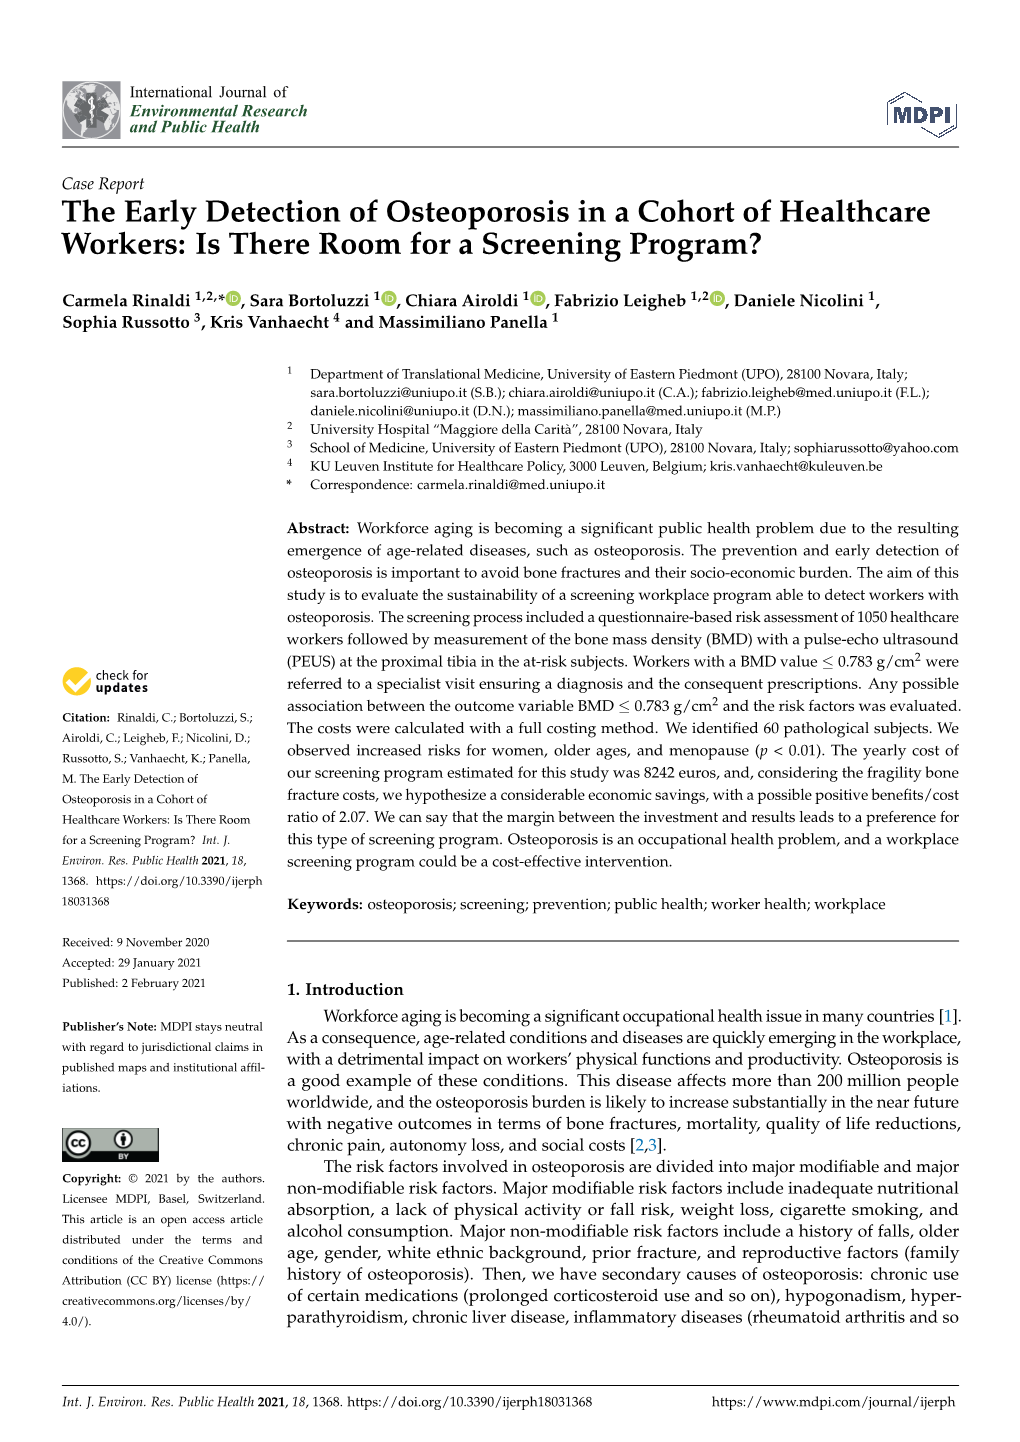 The Early Detection of Osteoporosis in a Cohort of Healthcare Workers: Is There Room for a Screening Program?